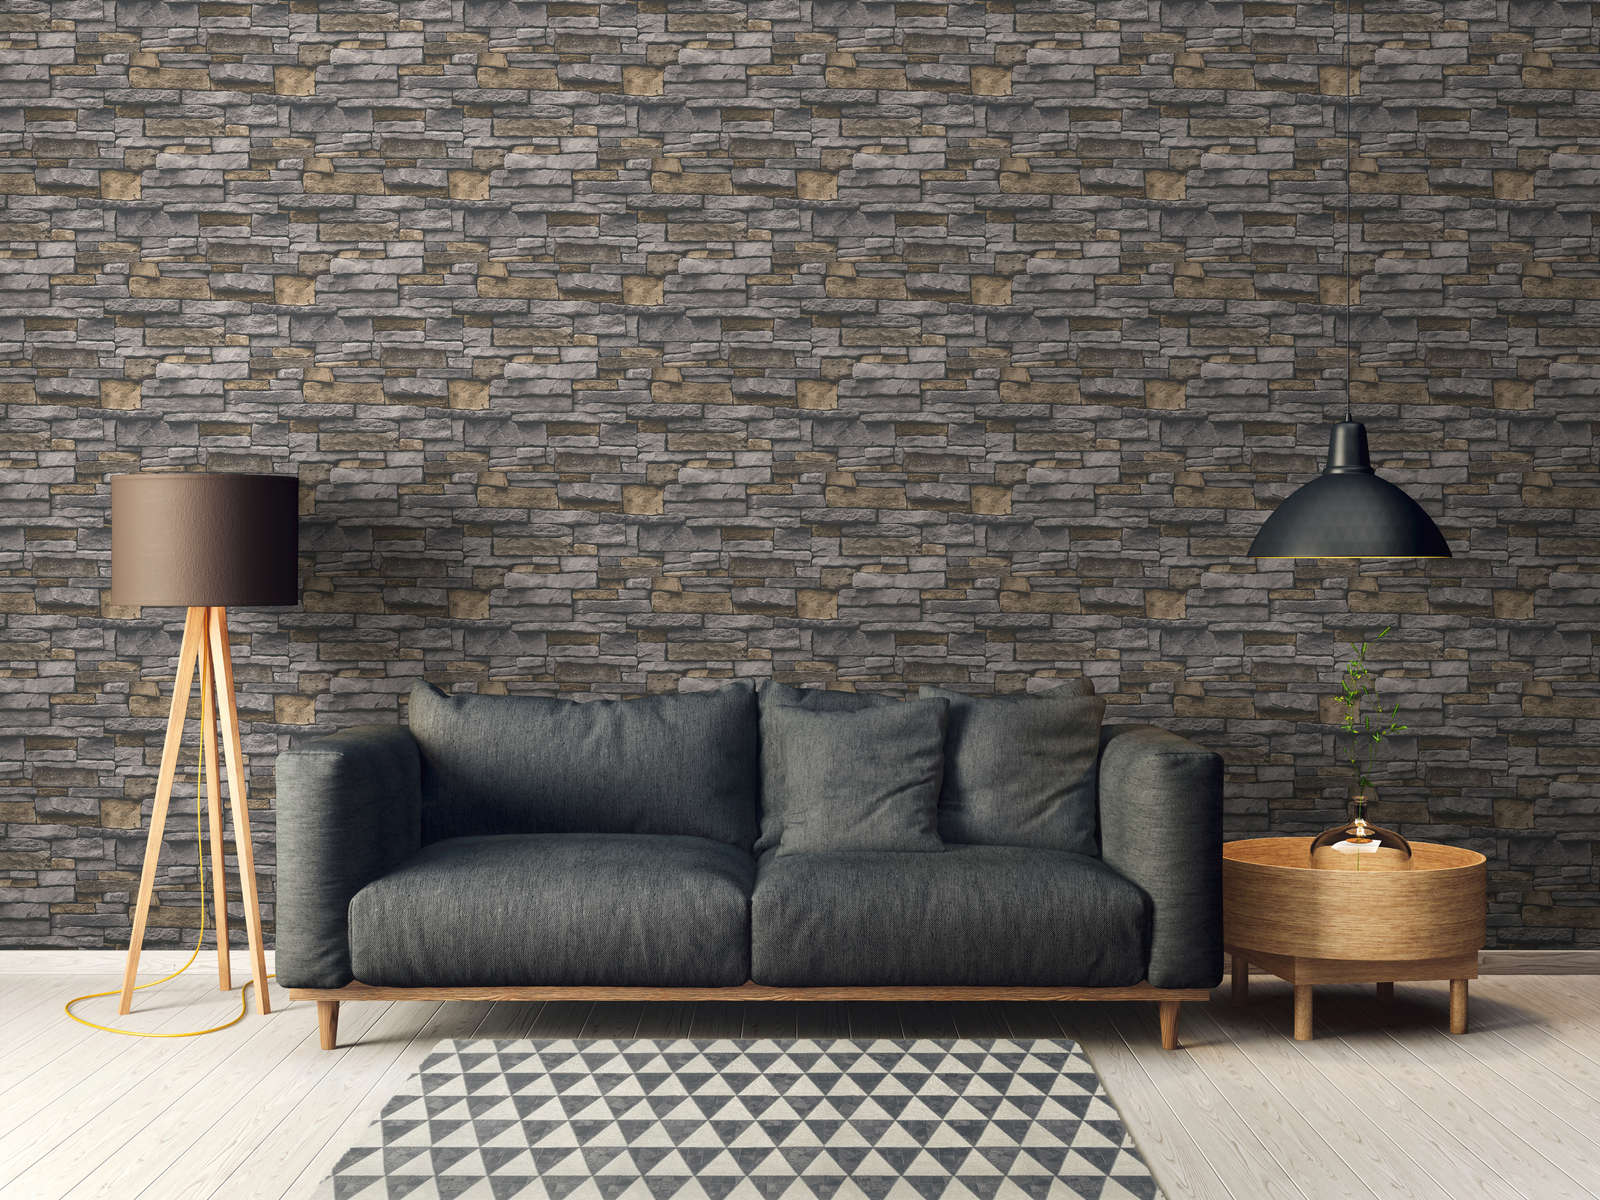             Non-woven wallpaper in stone look with natural stone wall - grey, beige
        